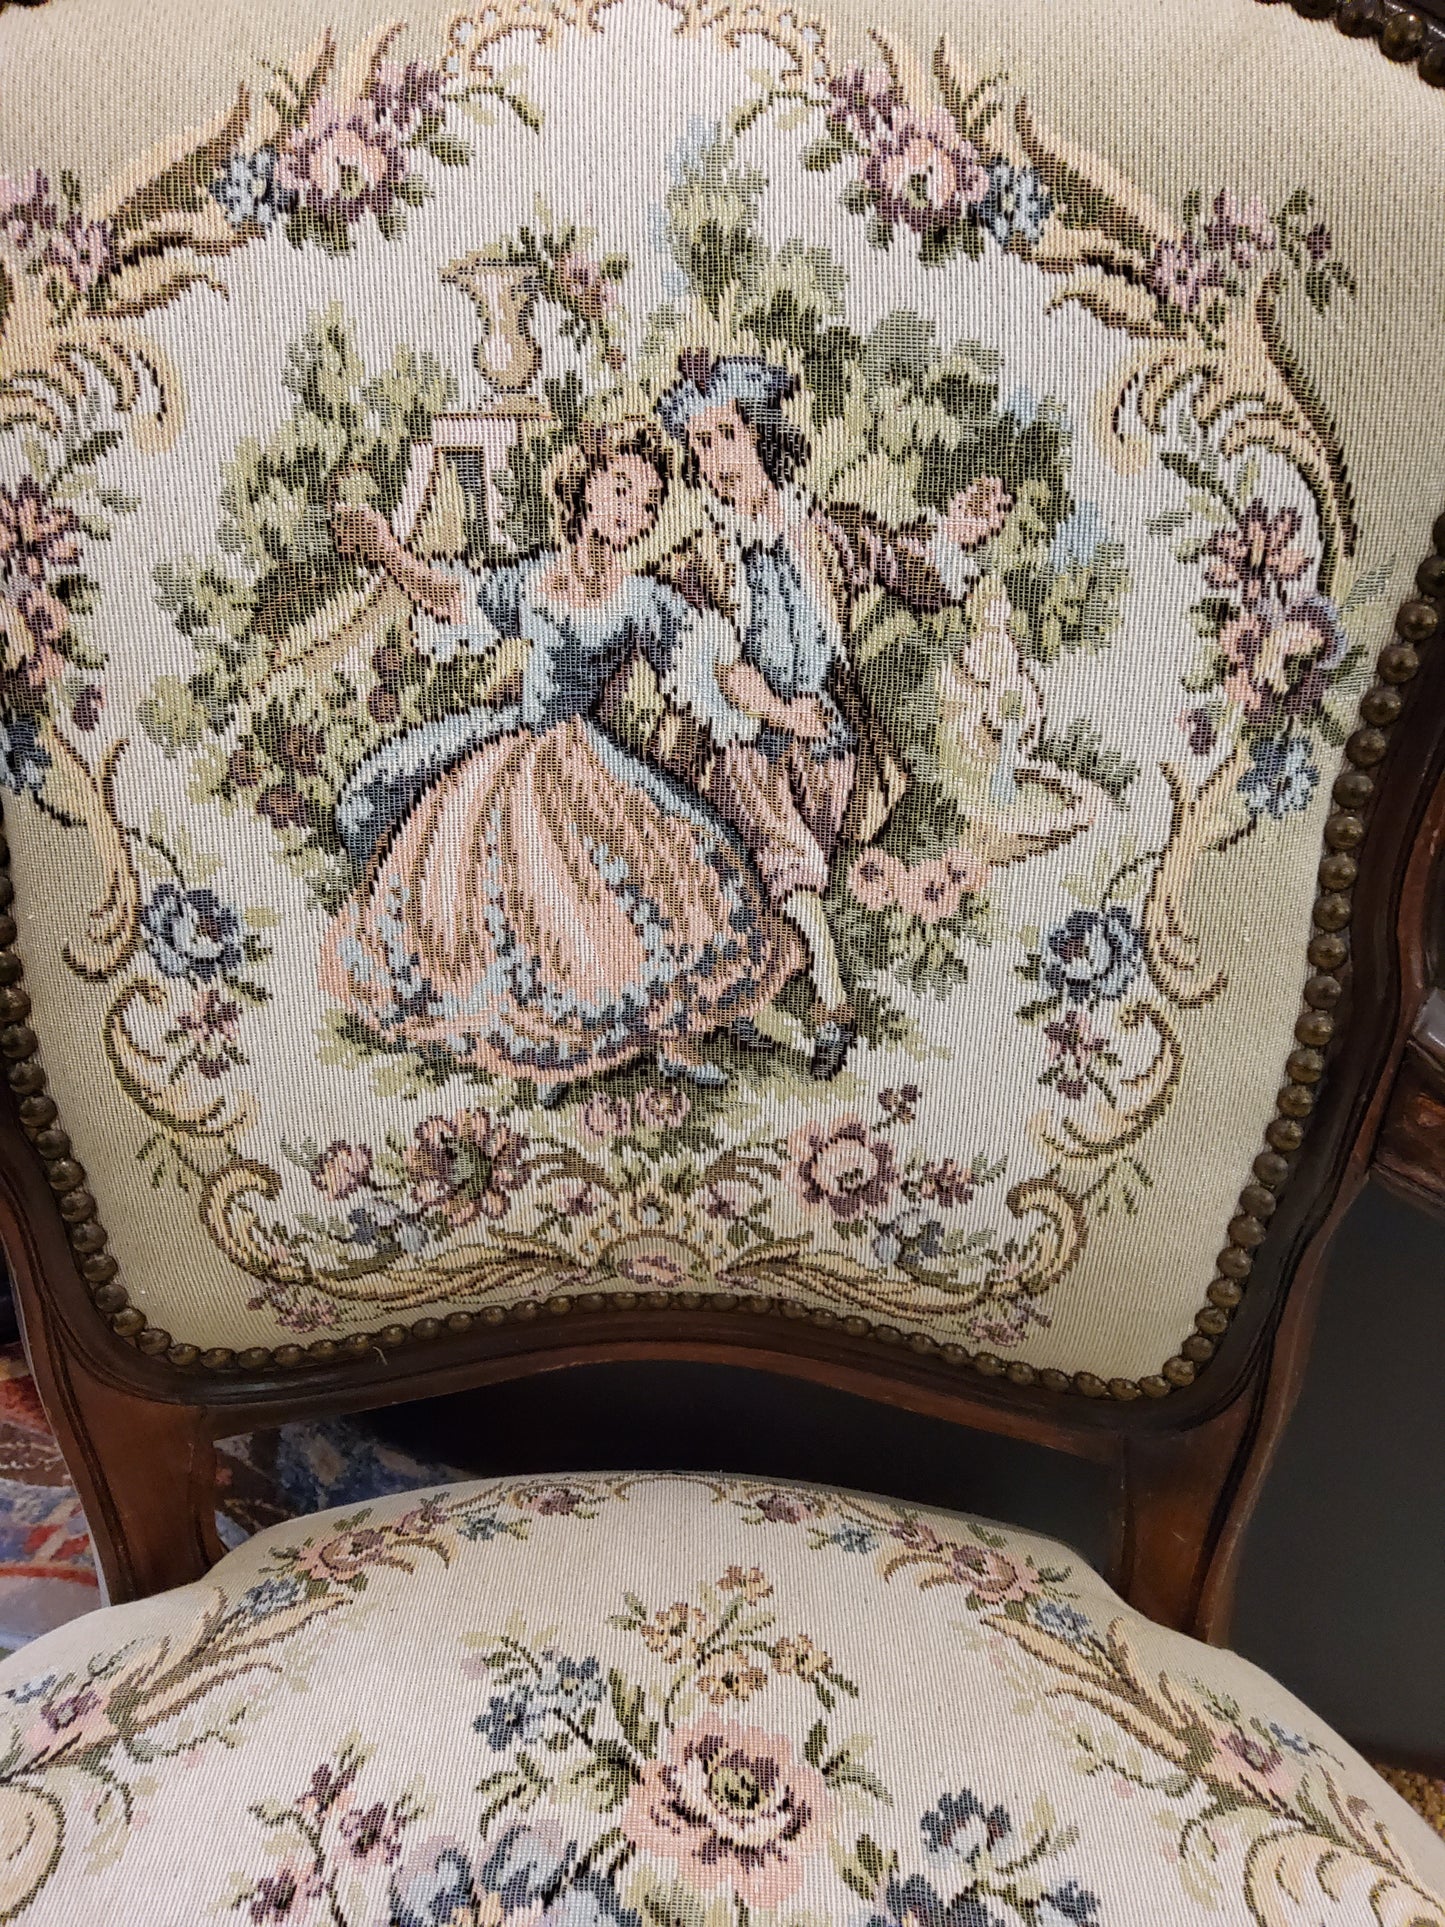 French style Victorian Chair